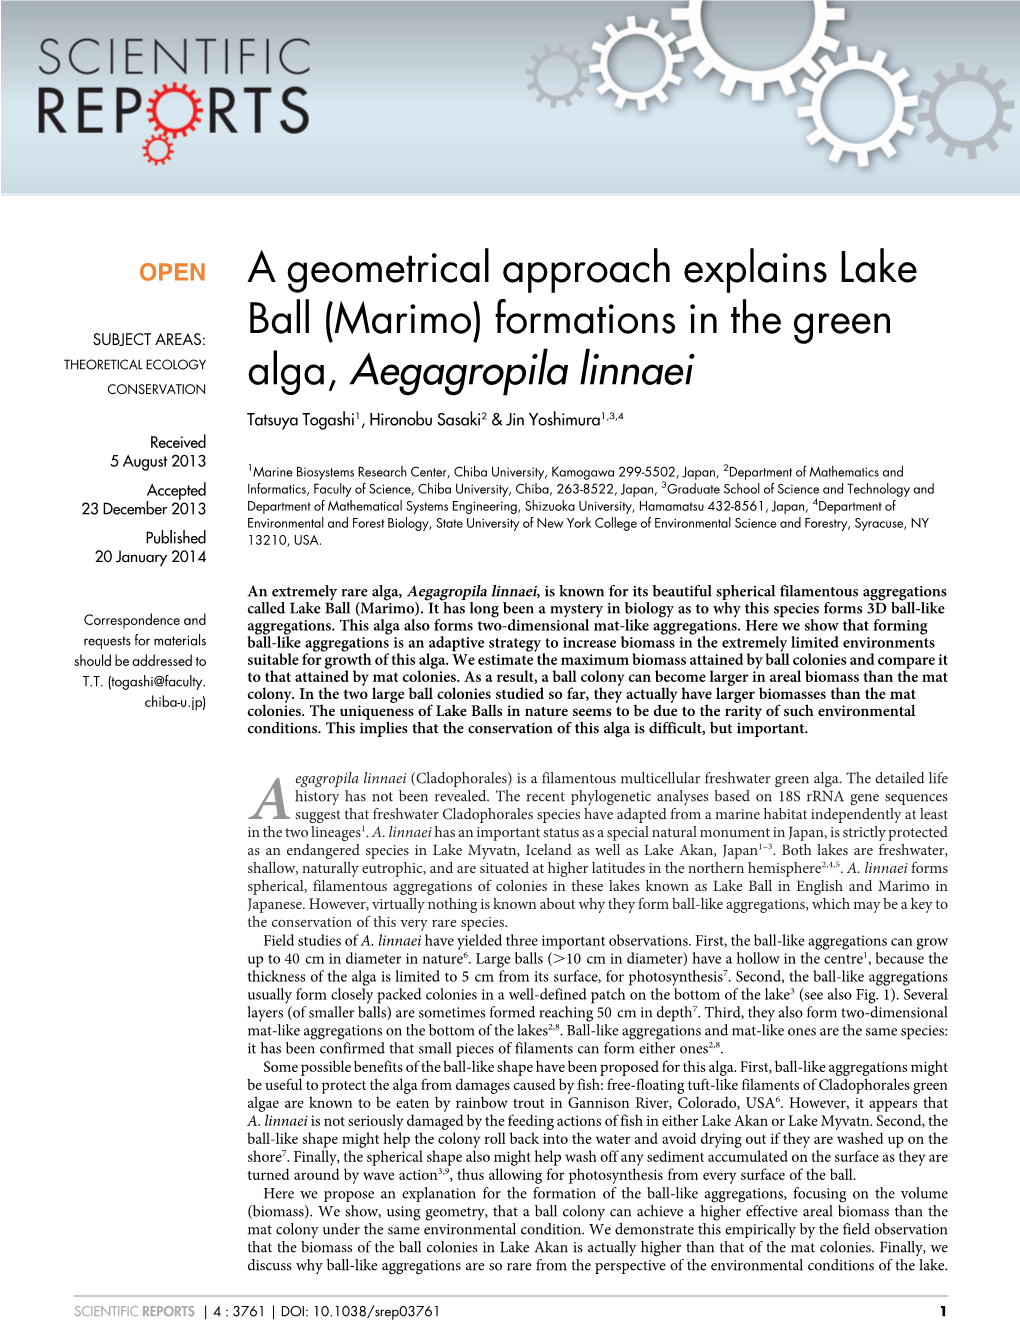 A Geometrical Approach Explains Lake Ball (Marimo) Formations in The